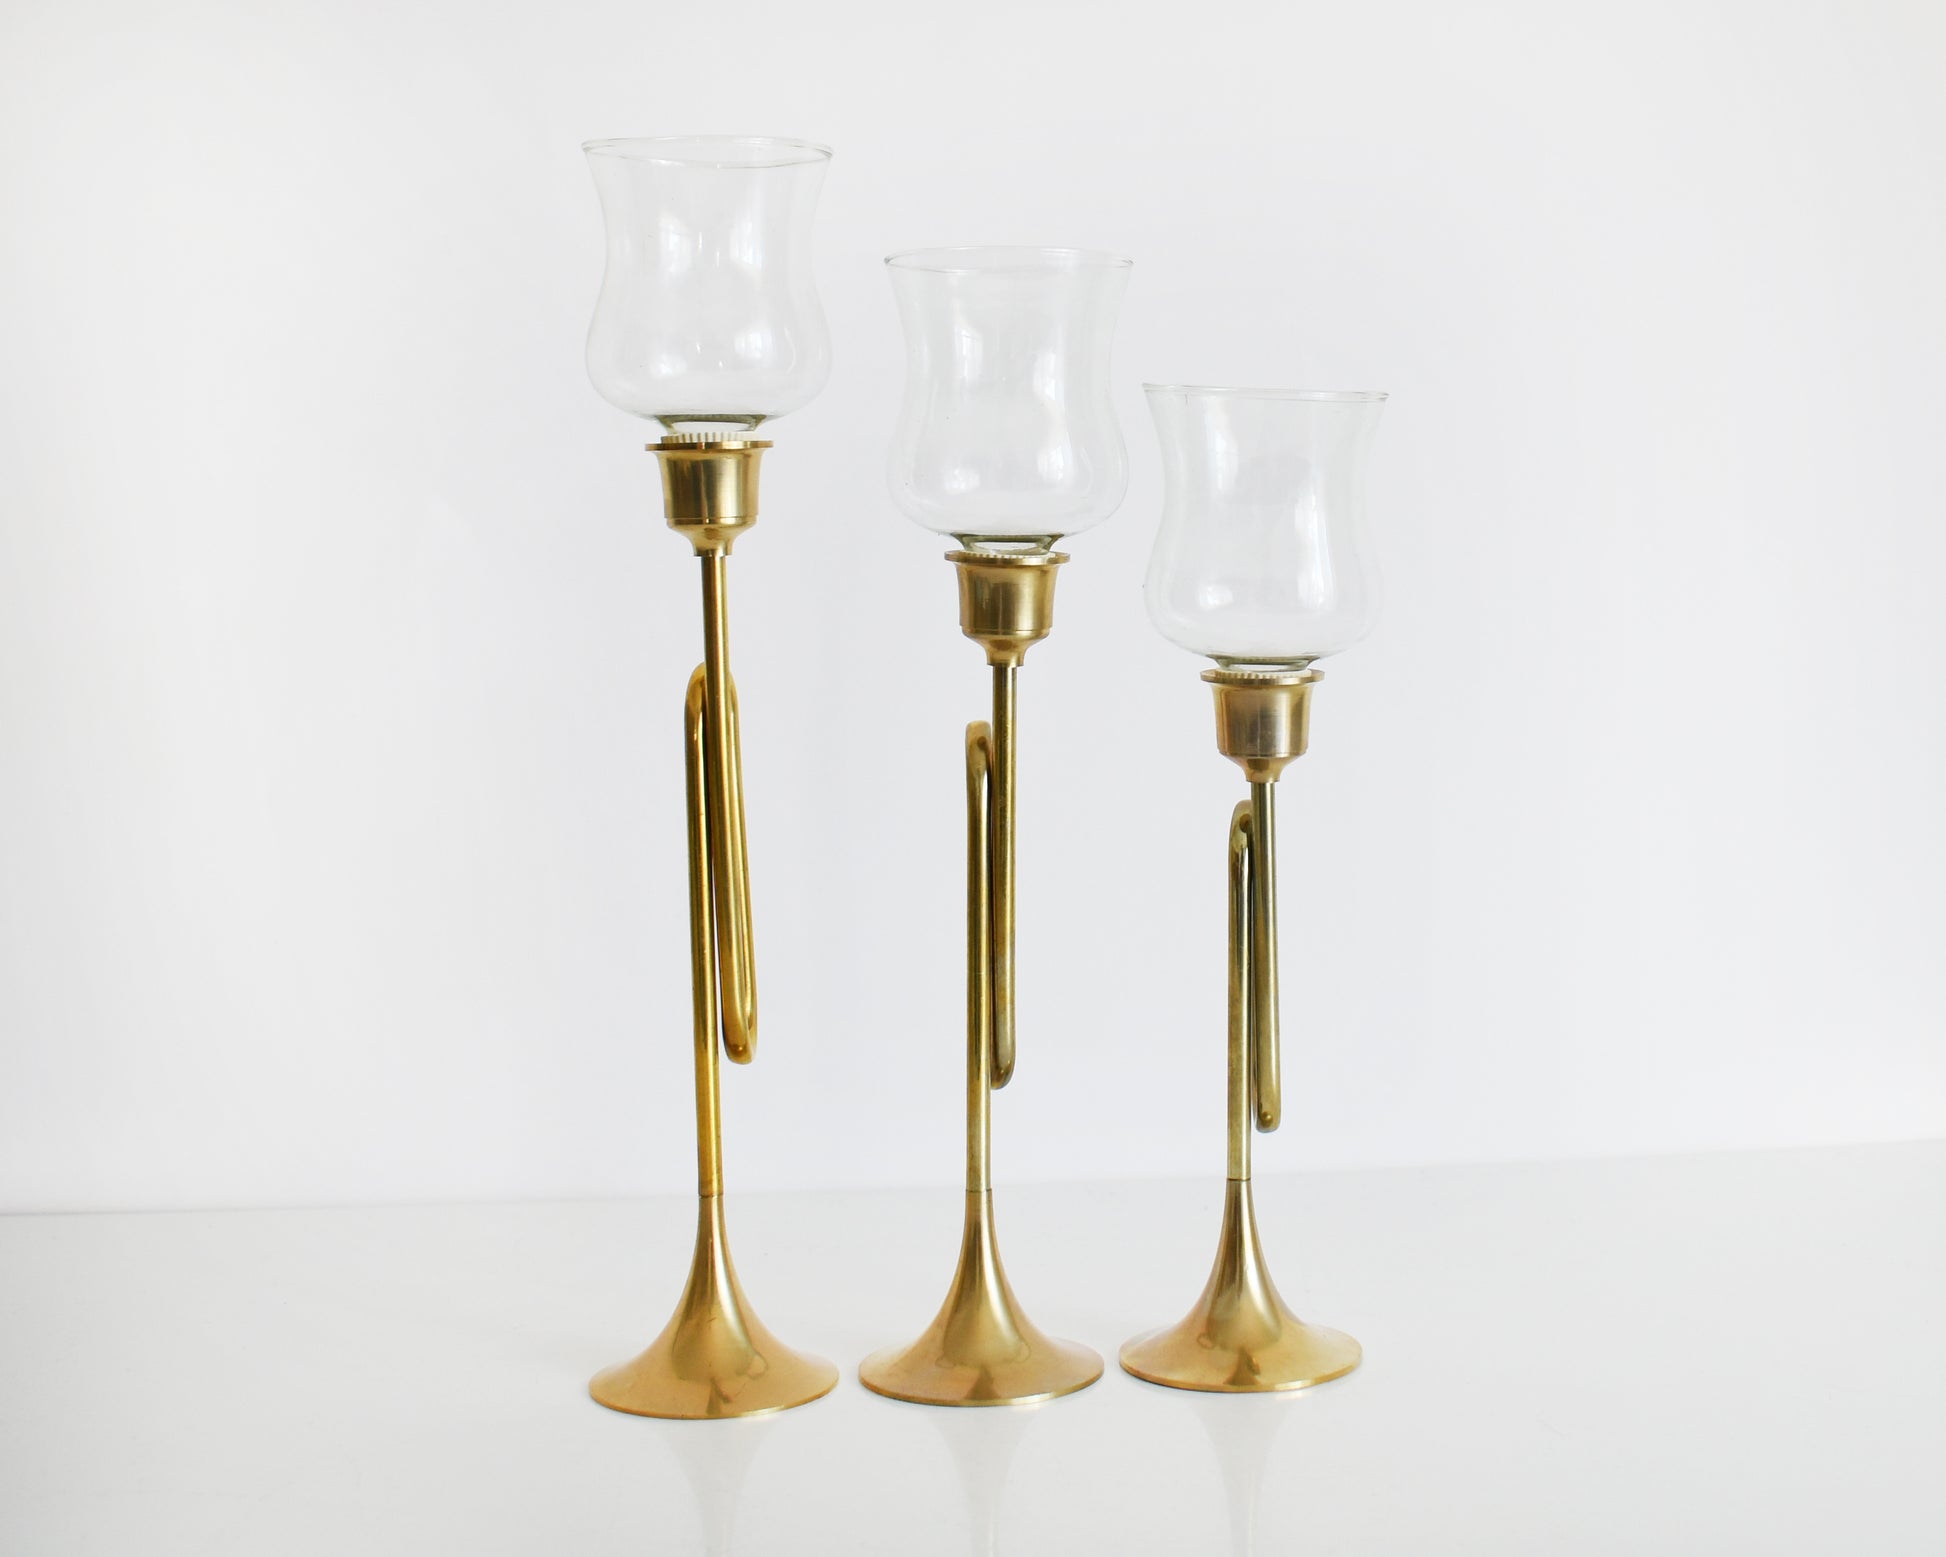 Side view of three vintage brass bugle/horn candlesticks that has clear class votives on top.